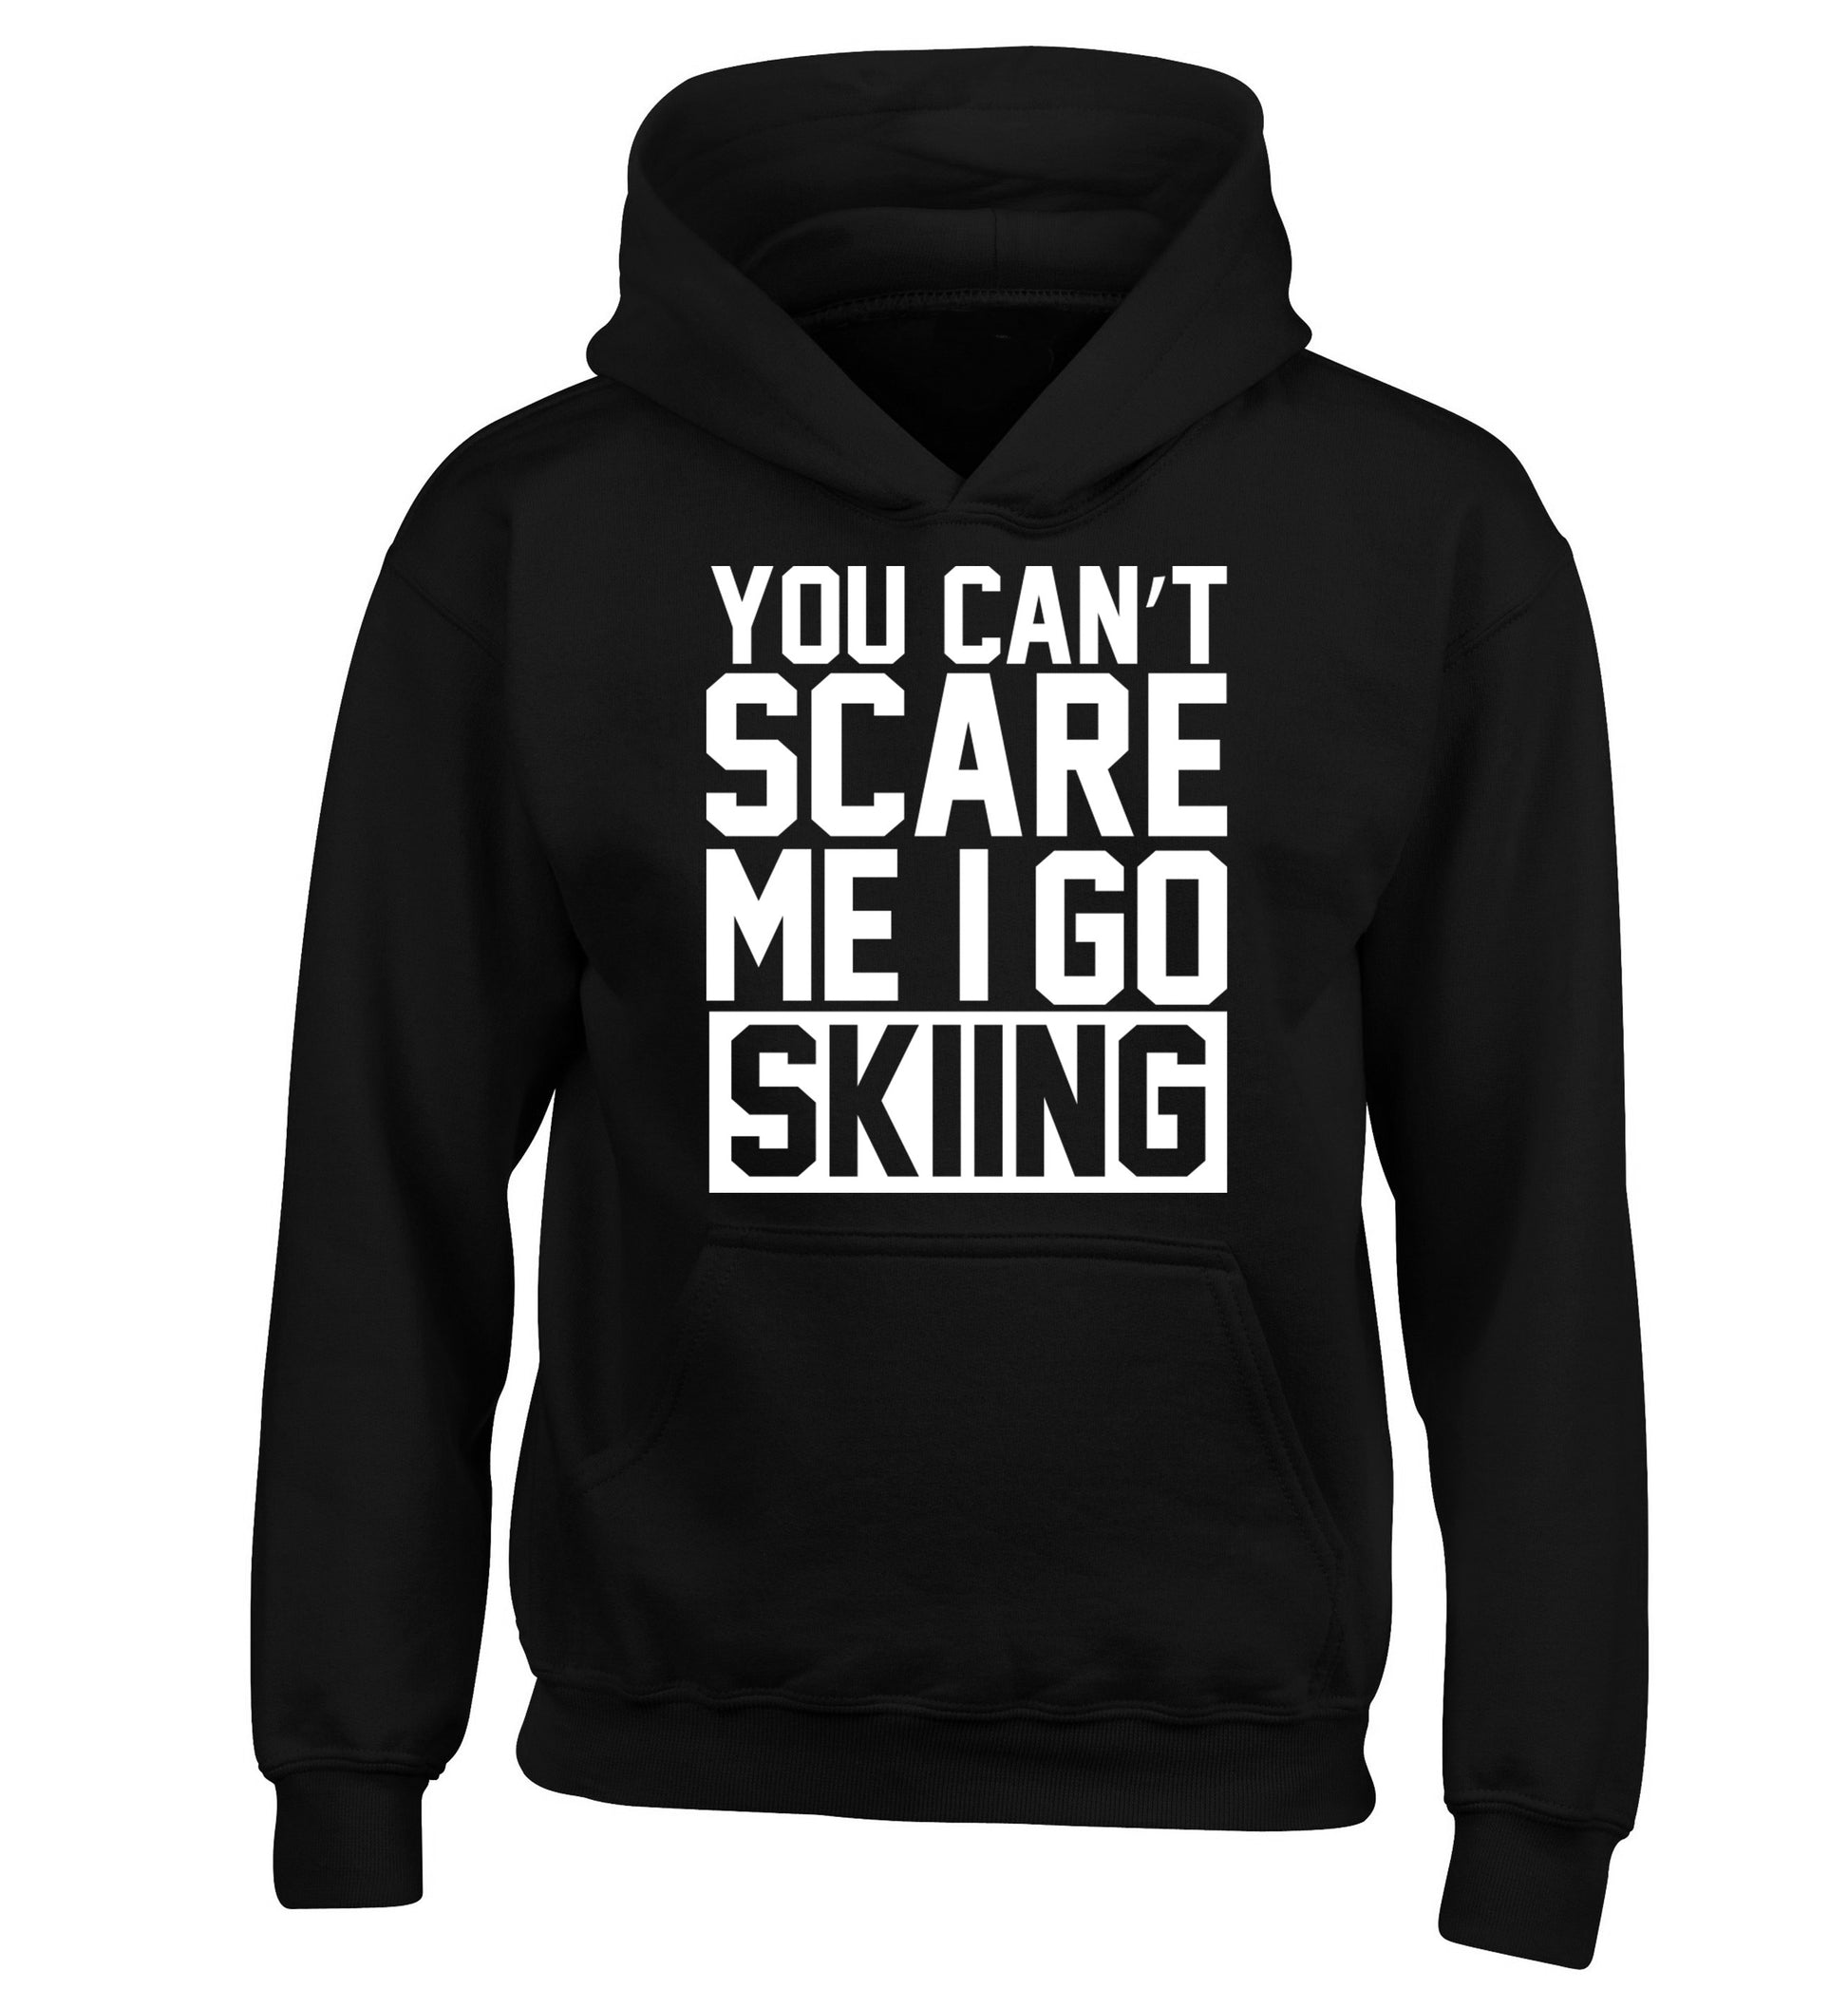 You can't scare me I go skiing children's black hoodie 12-14 Years